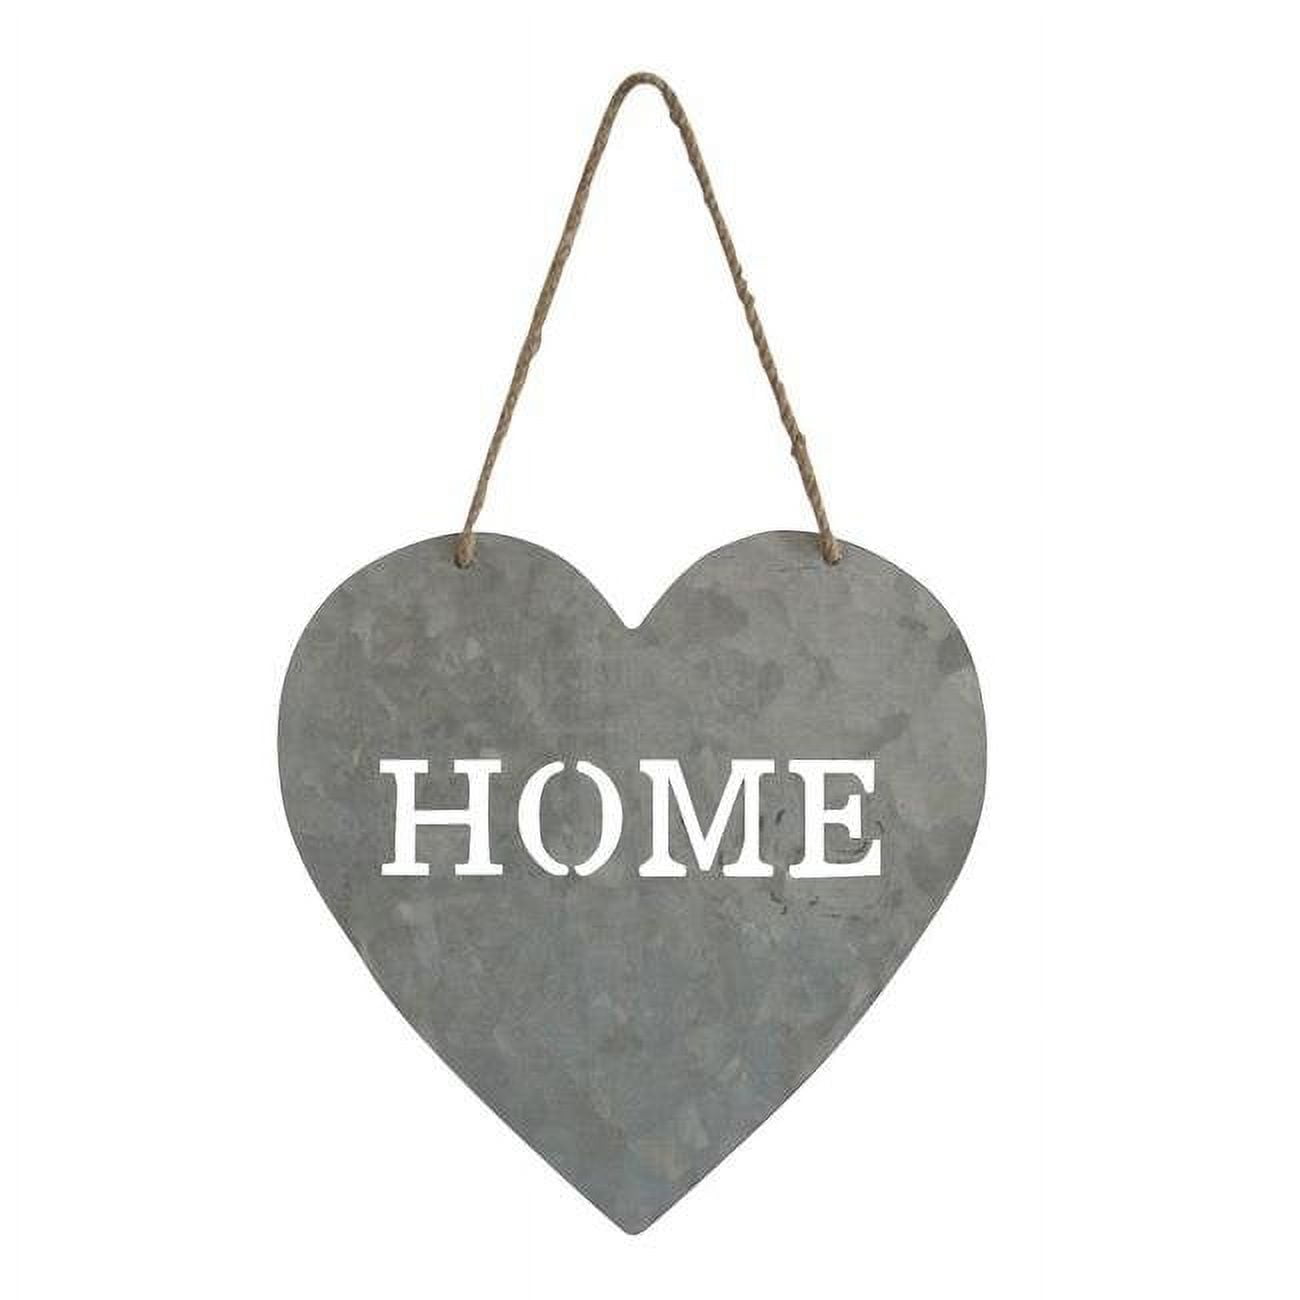 Cheung Fp-3390 Metal Heart Shaped Hanging Home